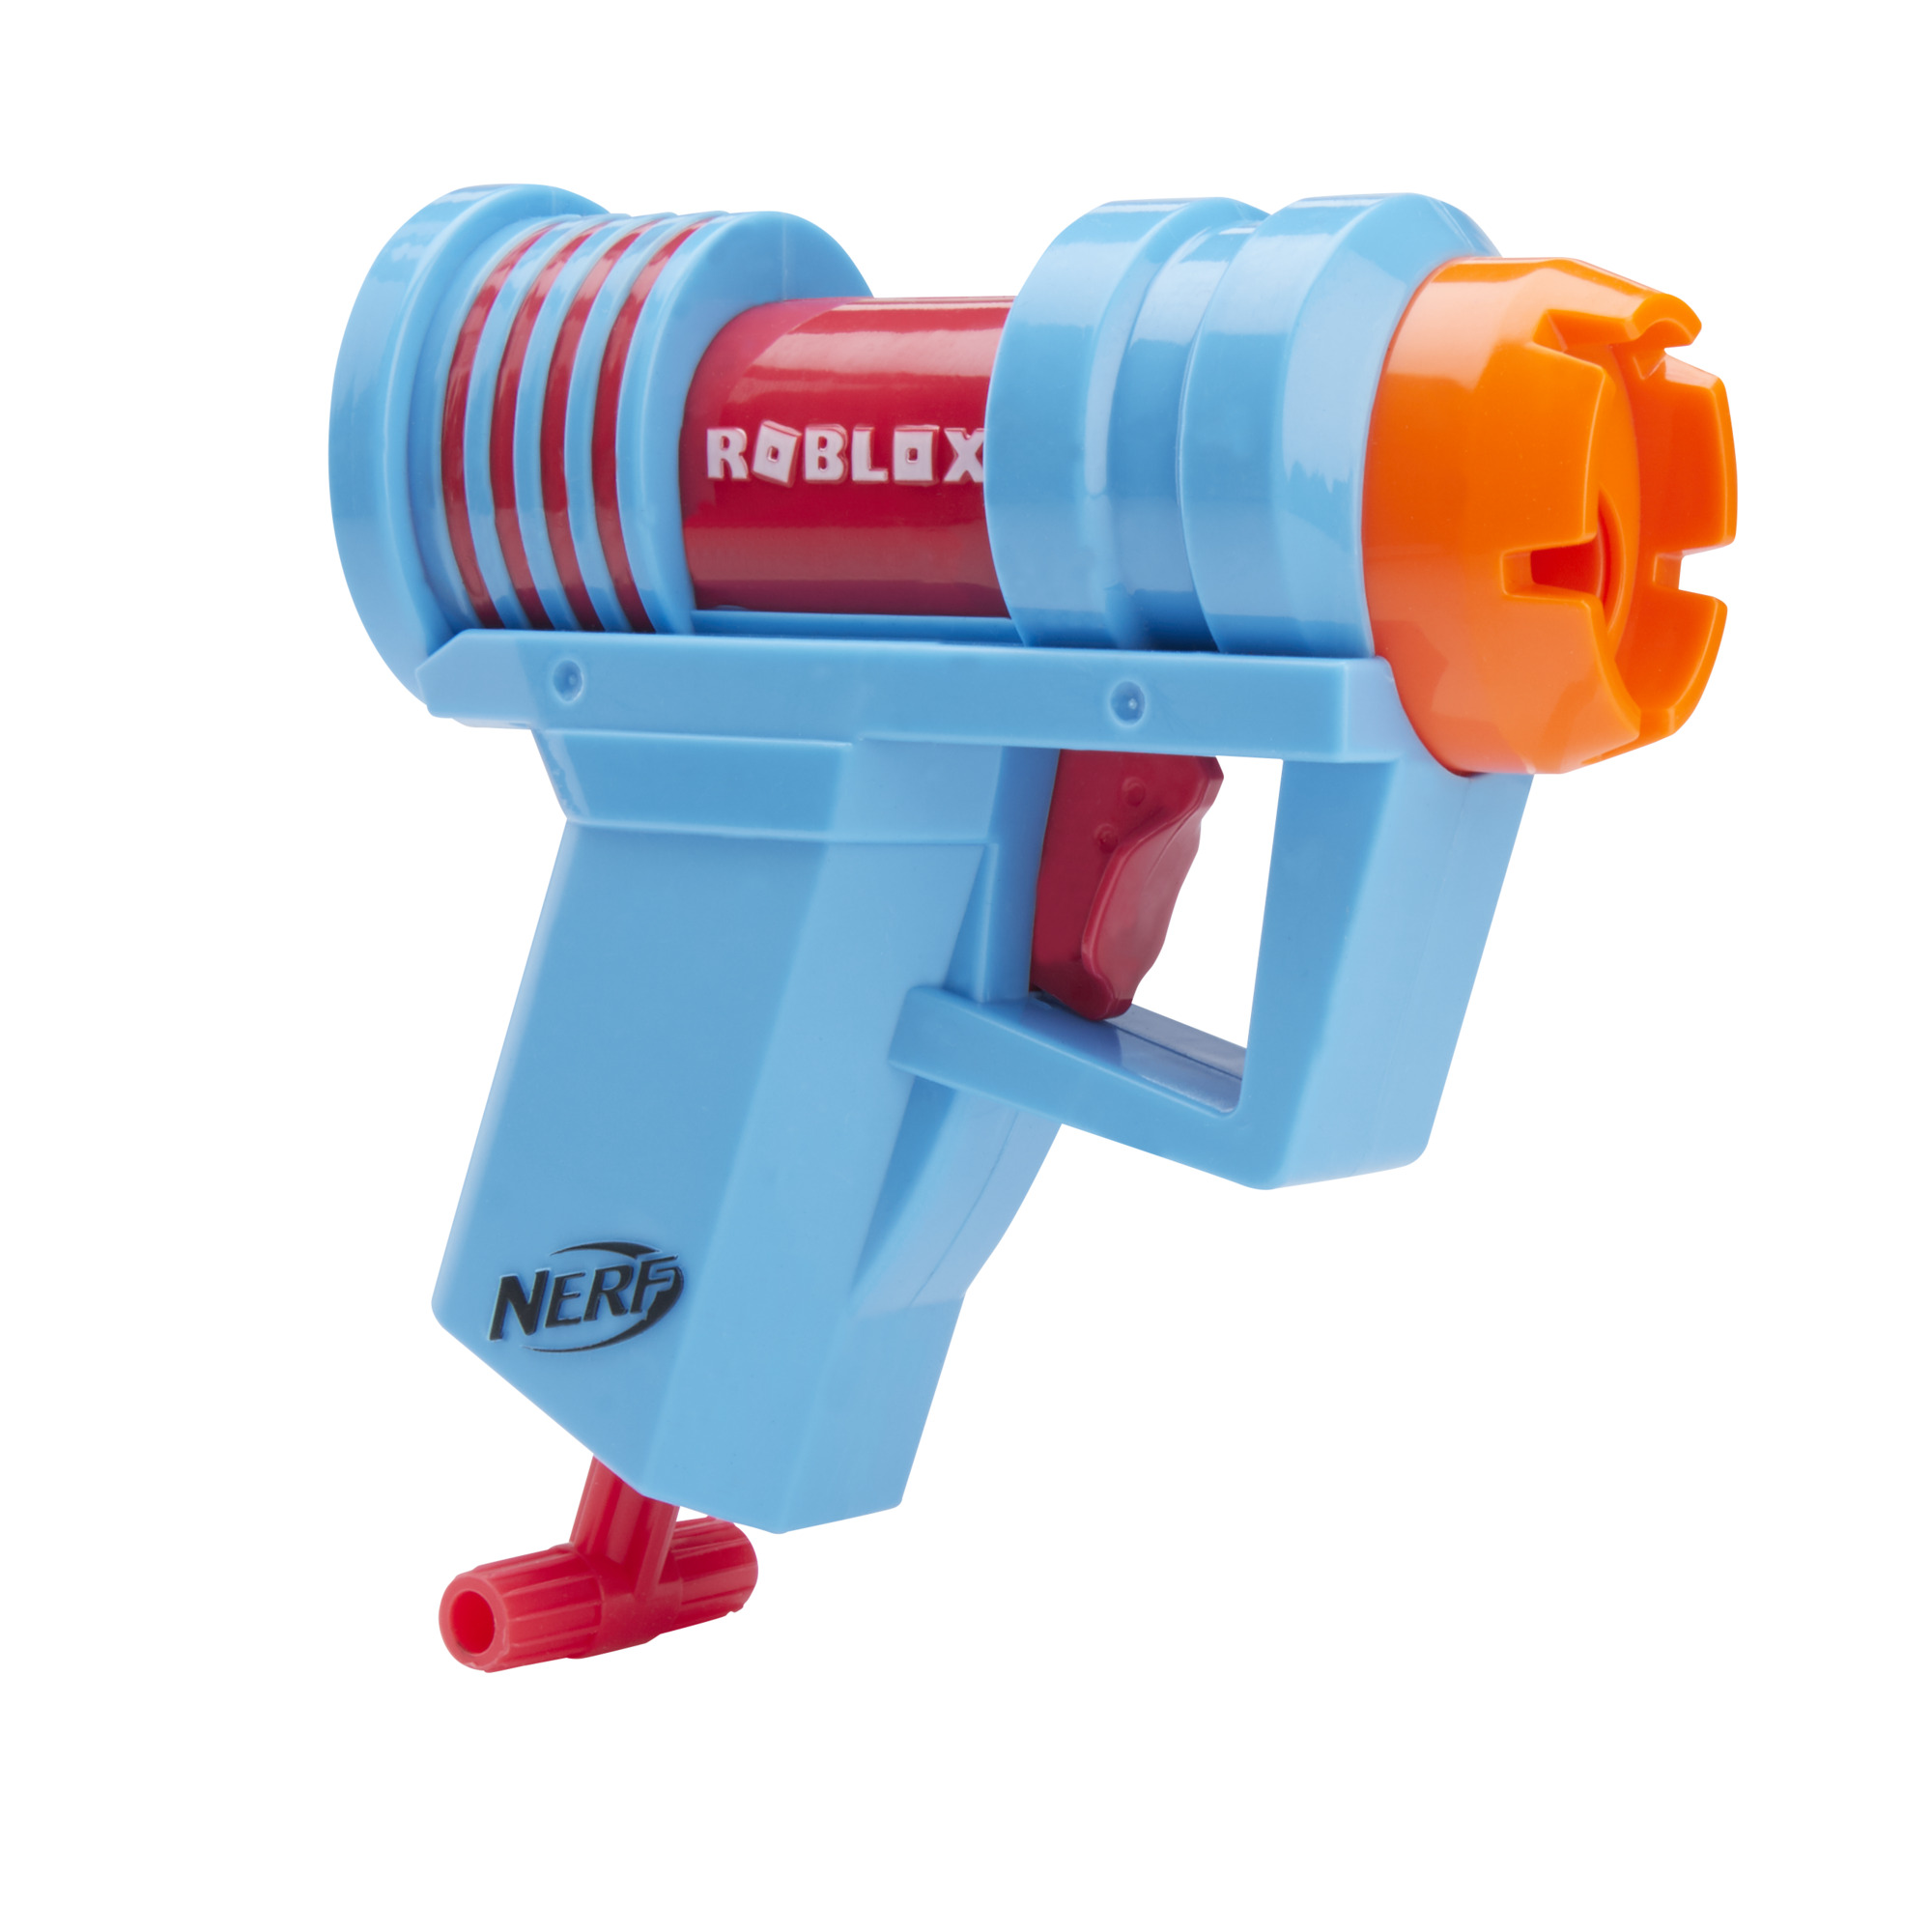 Hasbro, Roblox Team Up for NERF, Monopoly x Roblox Crossover - The